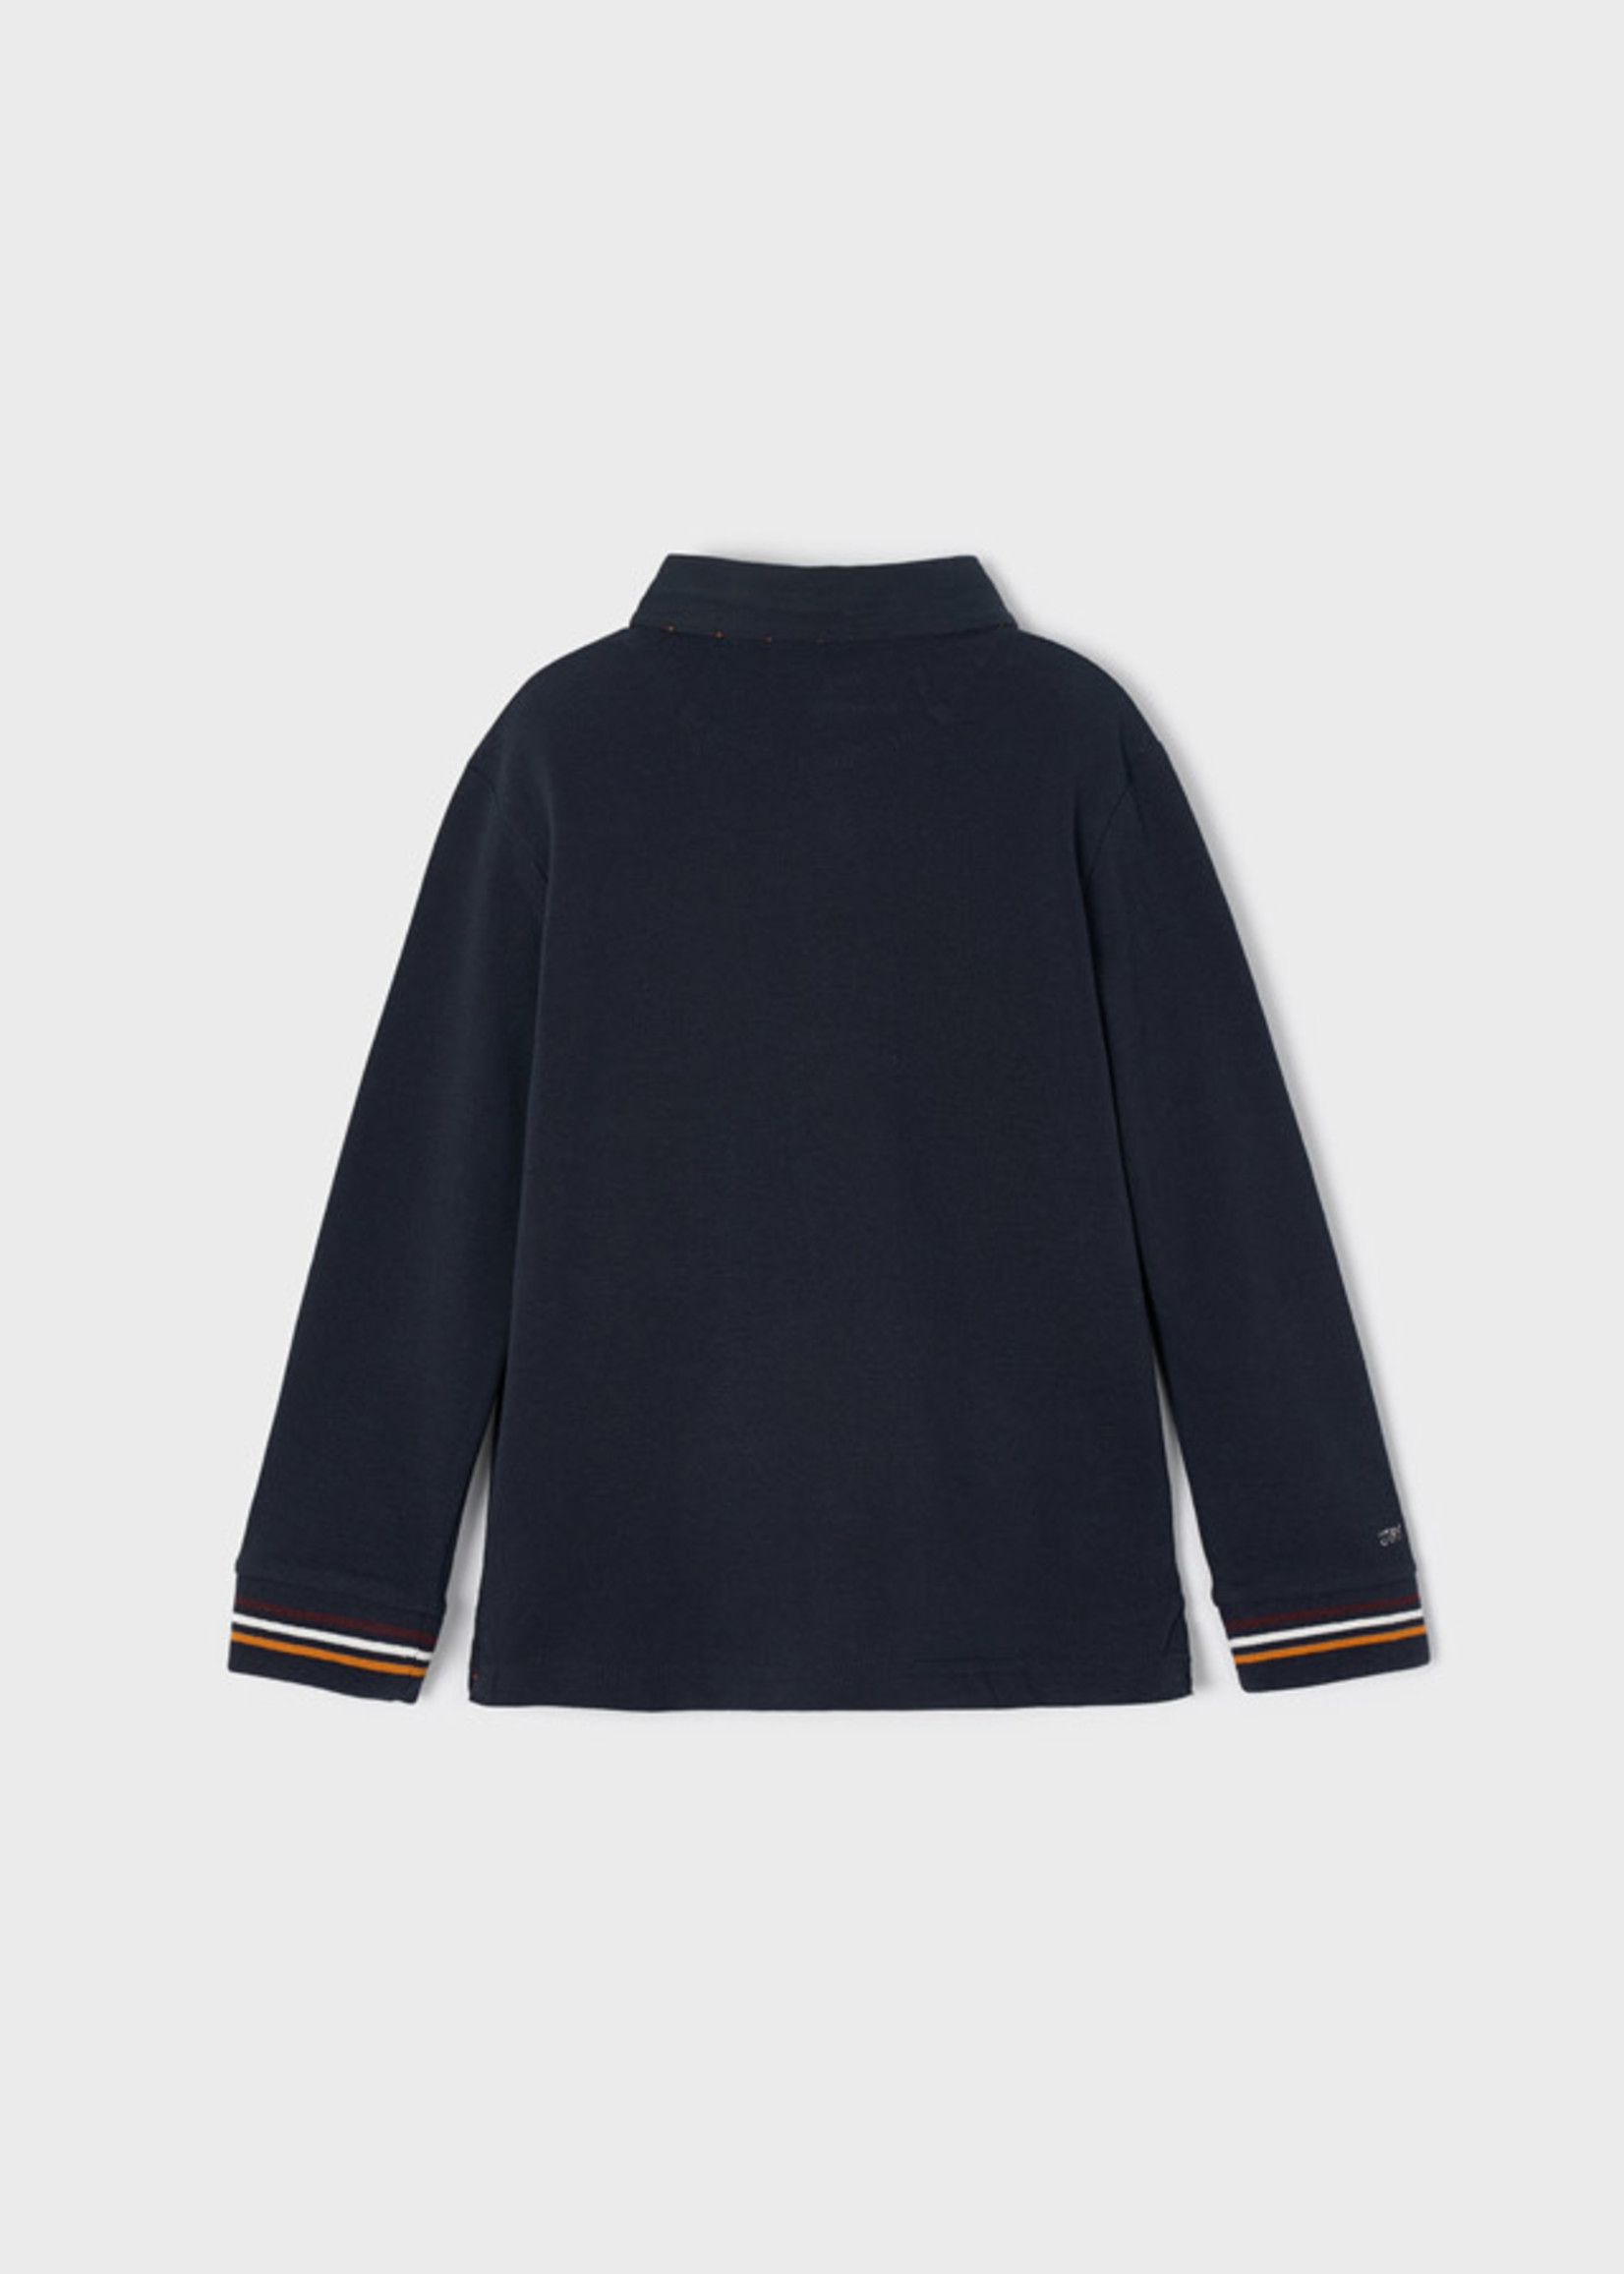 Mayoral L/s polo                      Navy